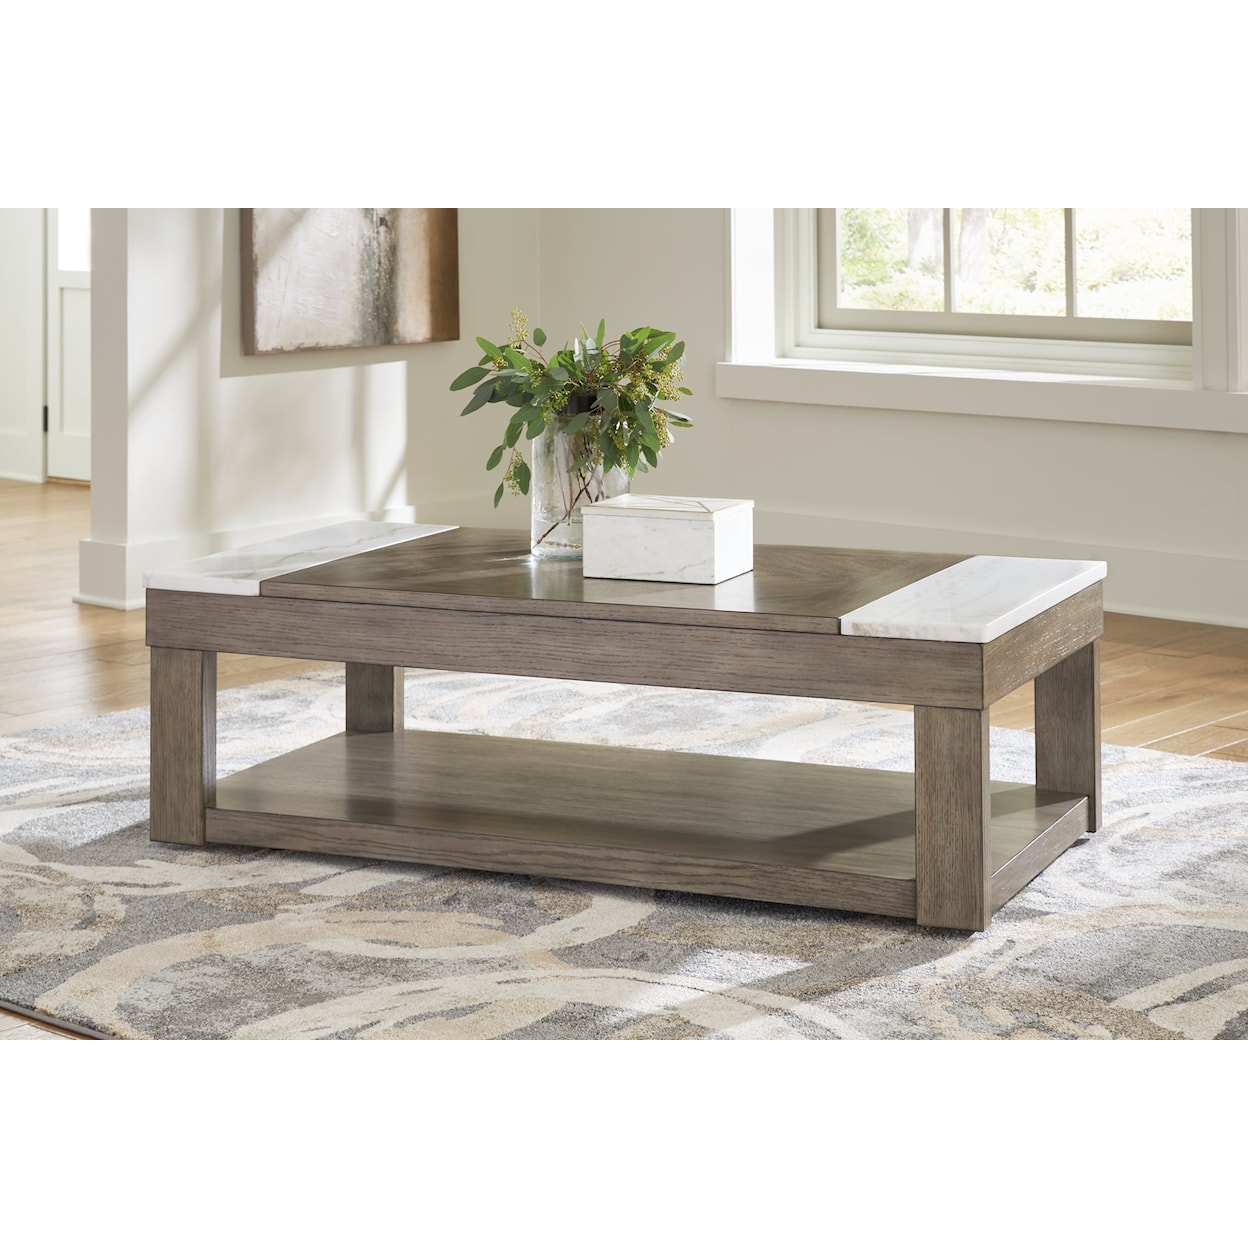 Ashley Signature Design Loyaska Lift-top Coffee Table and 2 End Tables